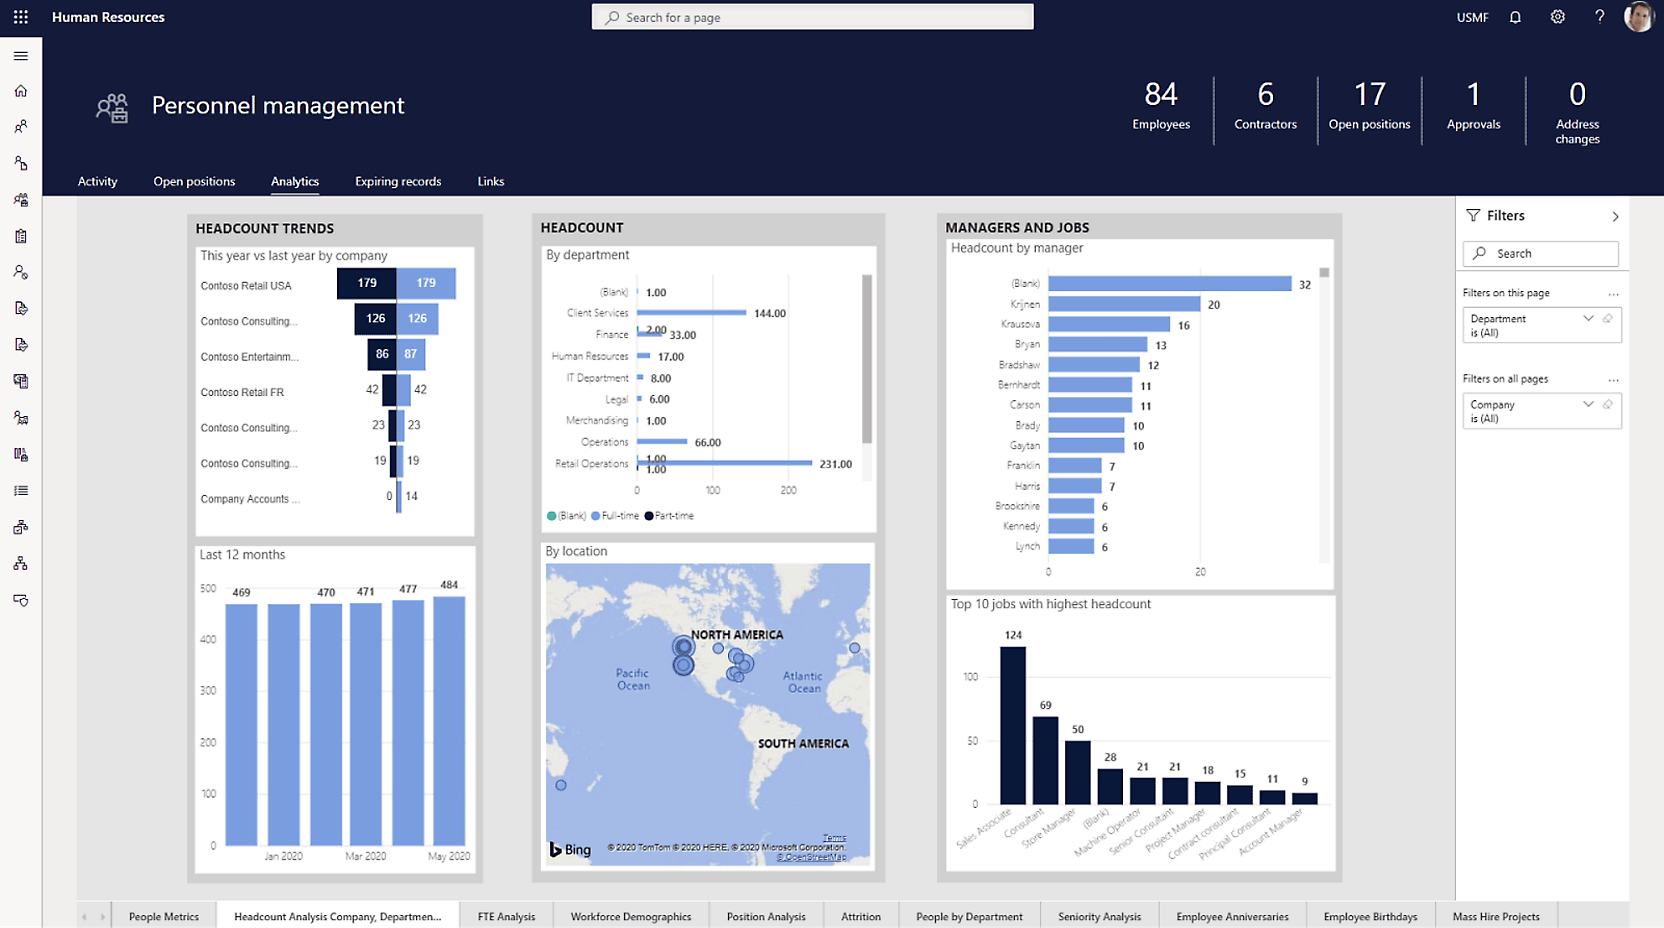 Dashboard showing various personnel management metrics, including headcount by department, managers and jobs